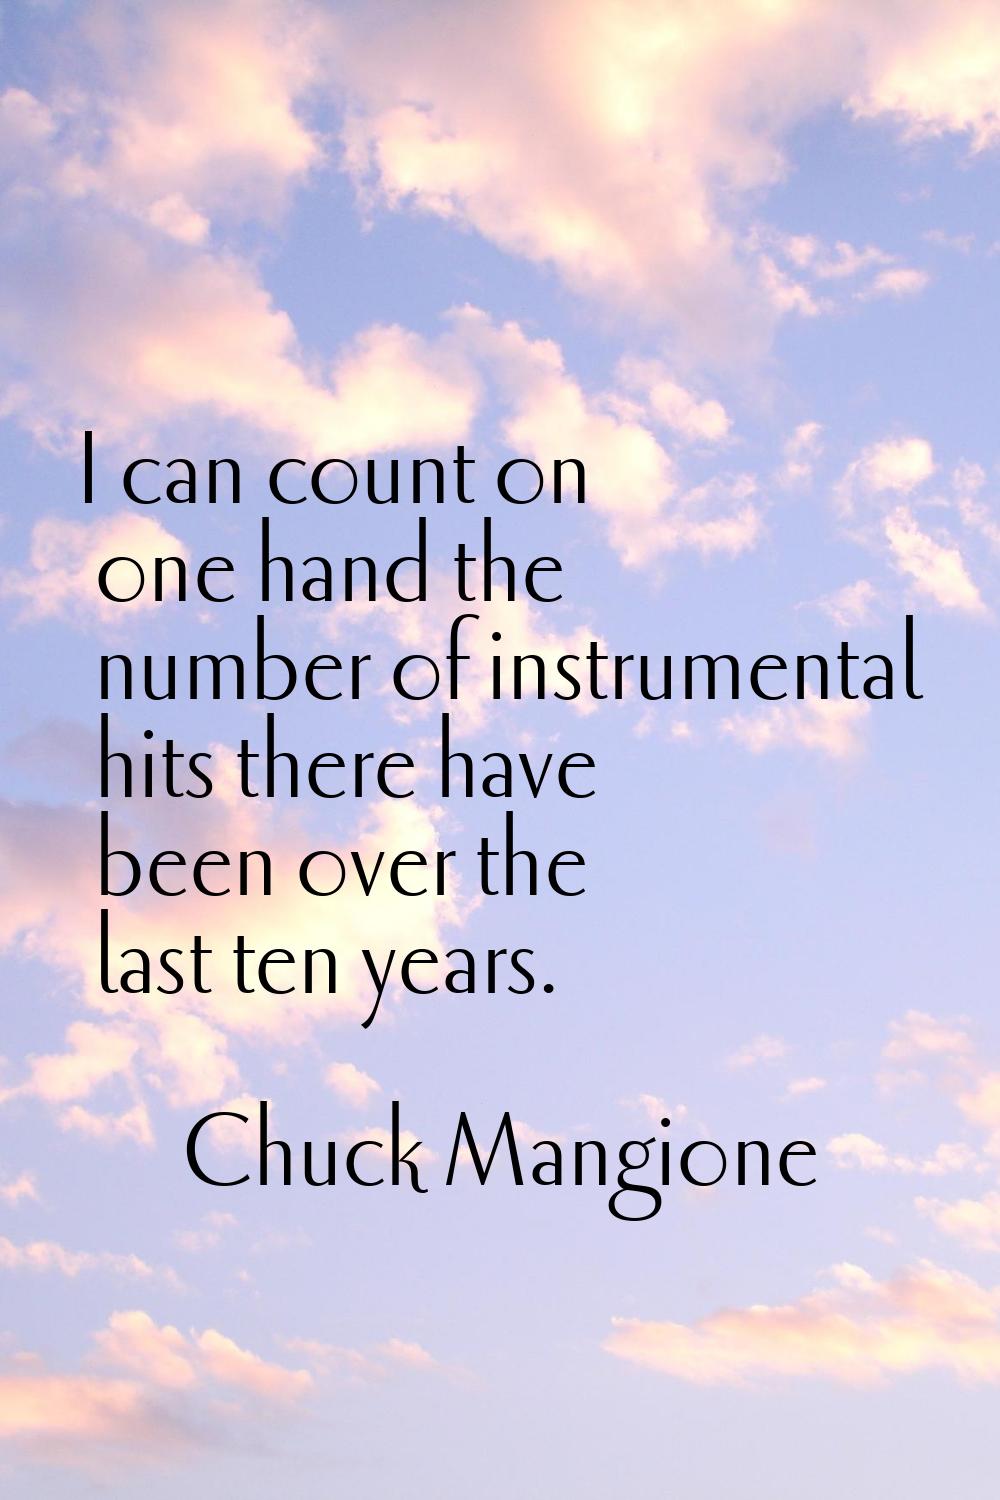 I can count on one hand the number of instrumental hits there have been over the last ten years.